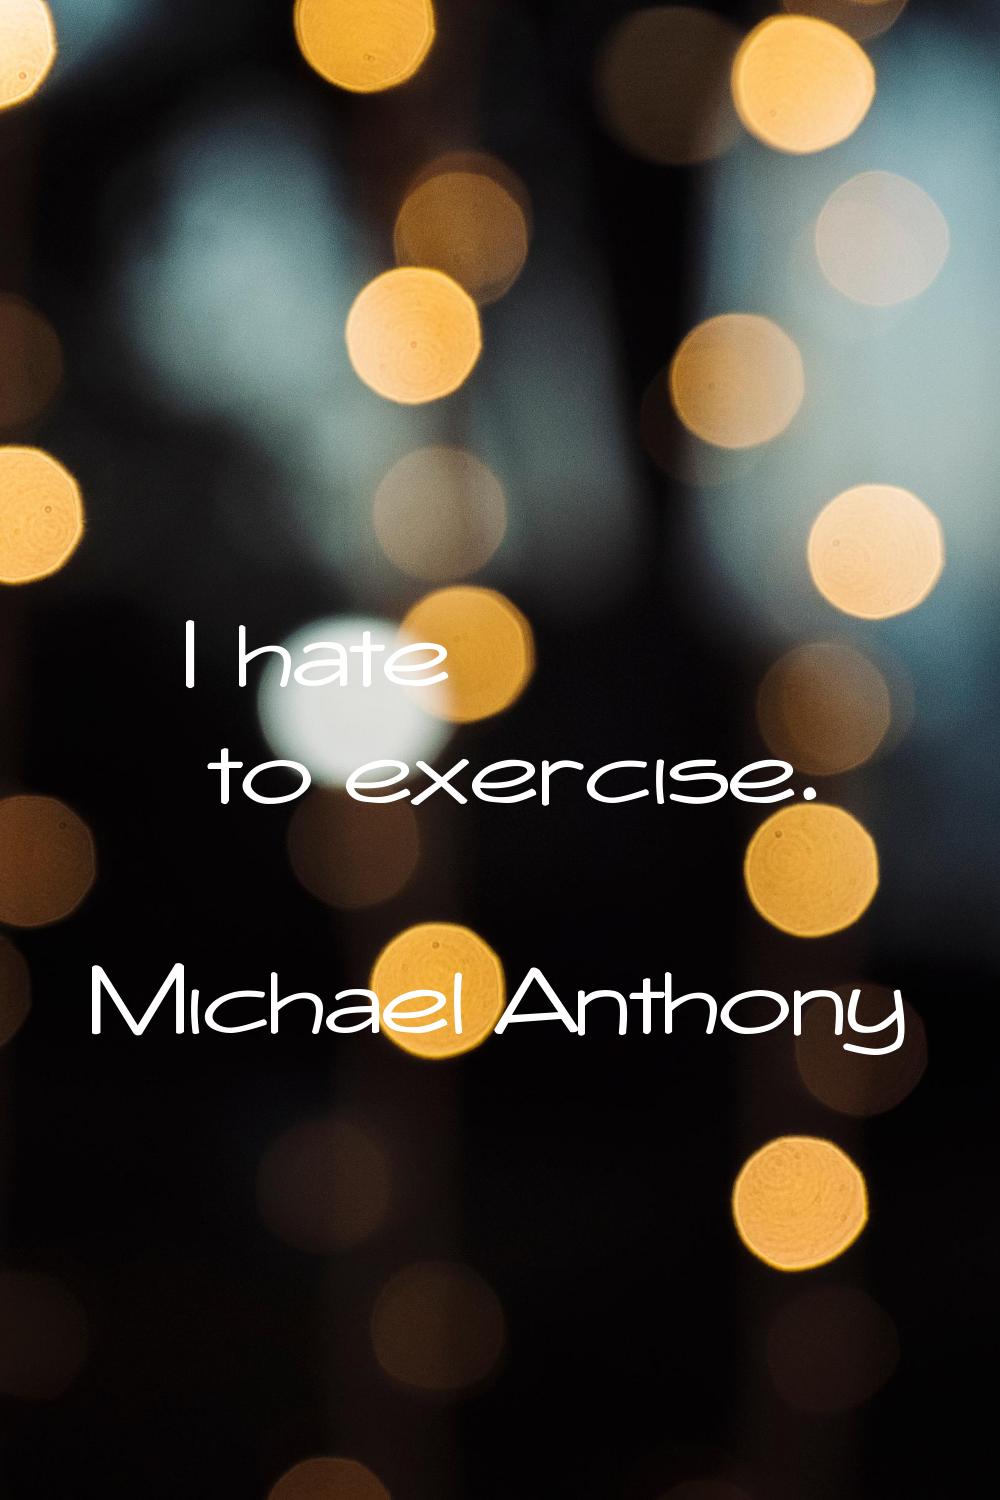 I hate to exercise.